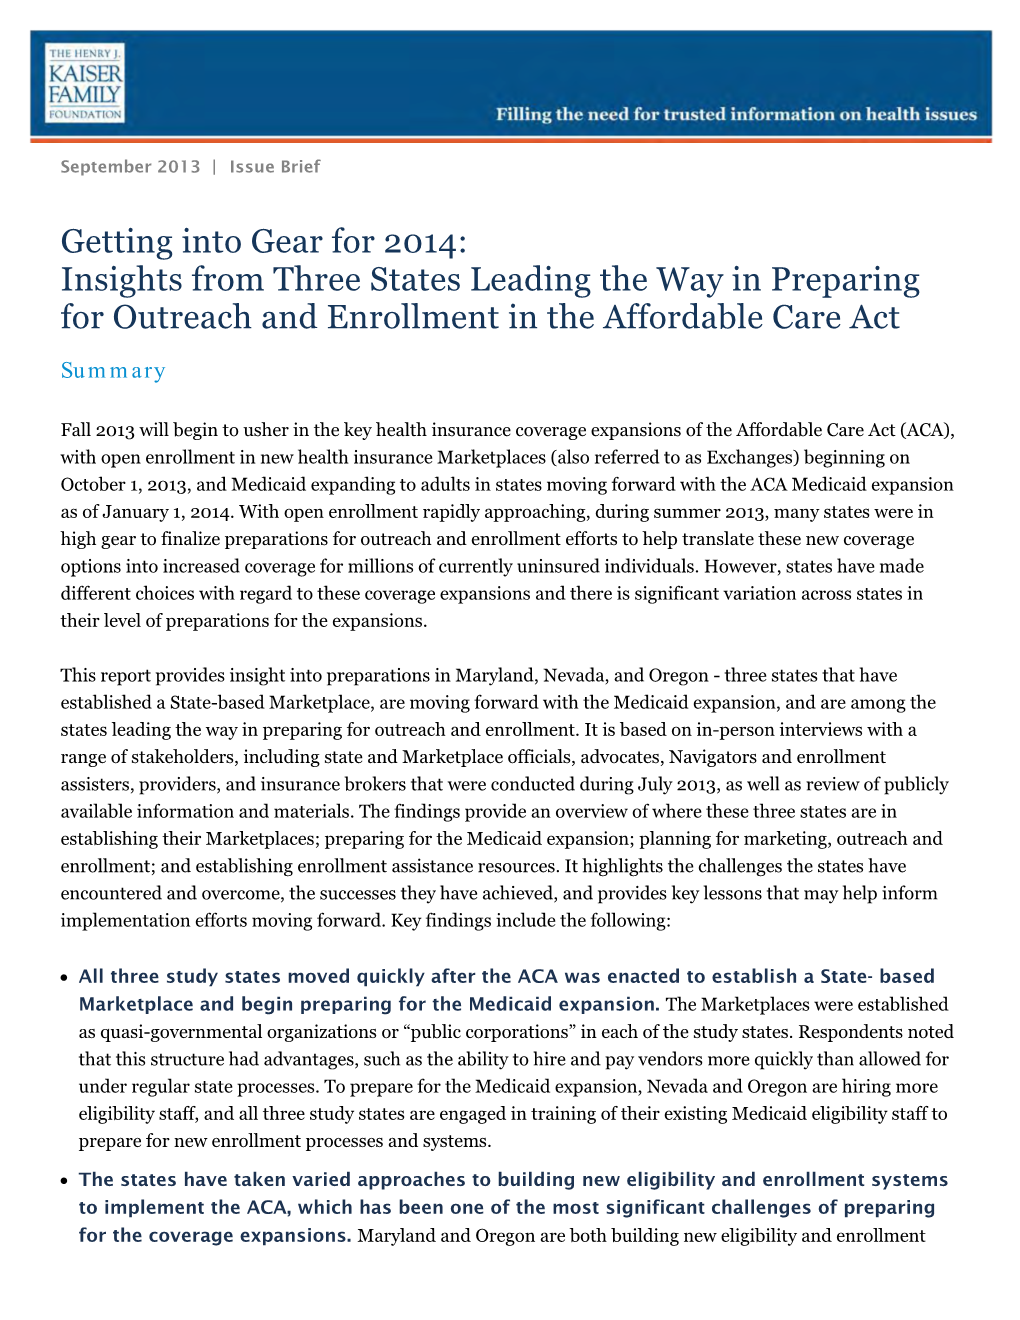 Insights from Three States Leading the Way in Preparing for Outreach and Enrollment in the Affordable Care Act